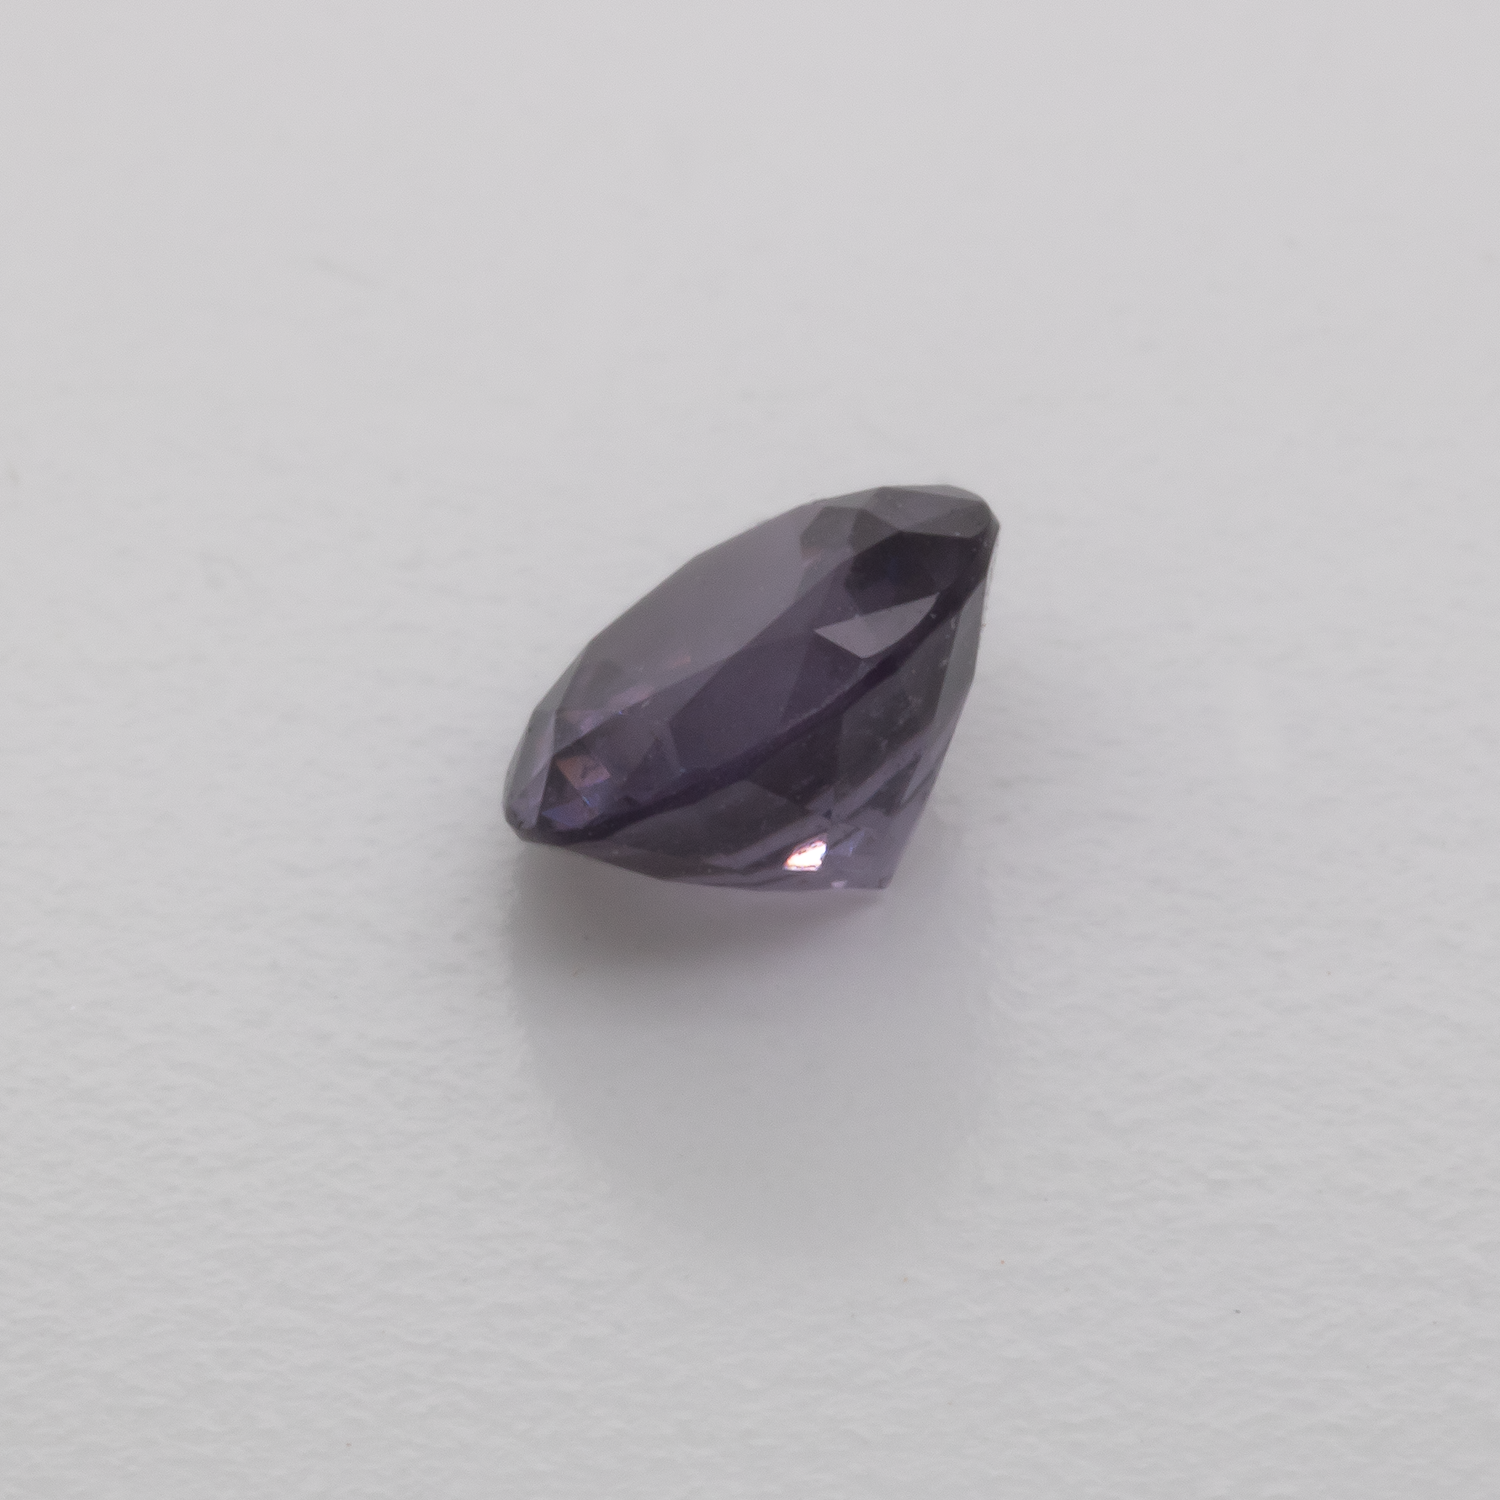 Spinell - lila, rund, 5,1x5,1 mm, 0,55 cts, Nr. SP90015